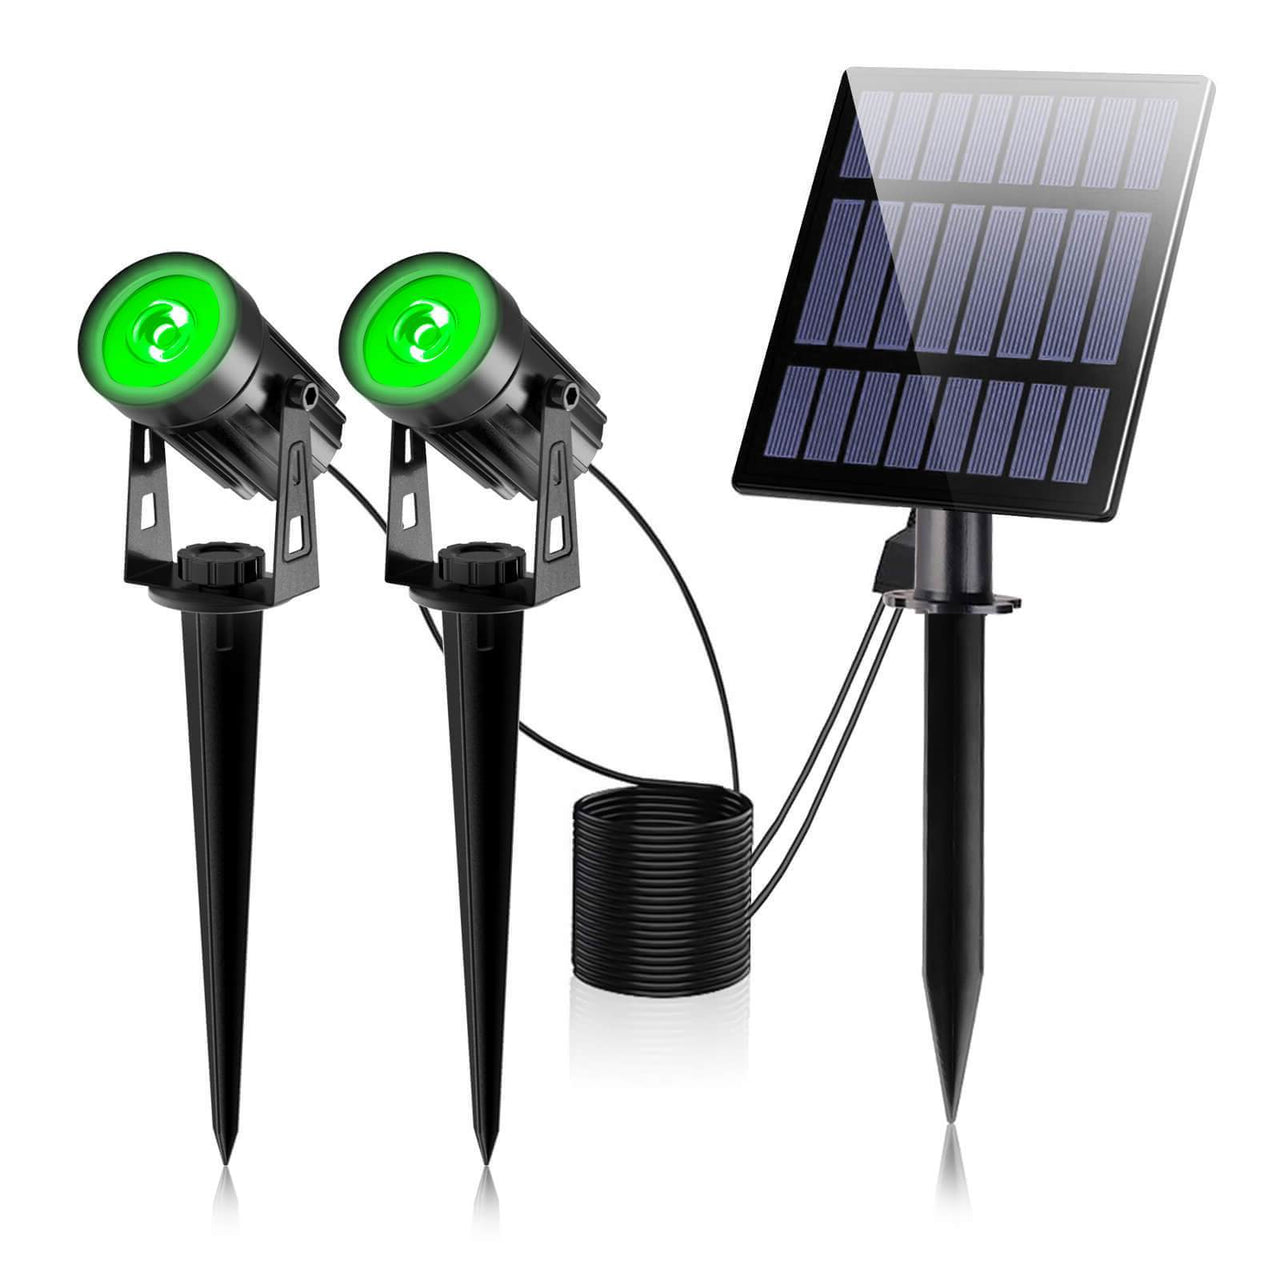 Green solar spot lights with separate solar panel